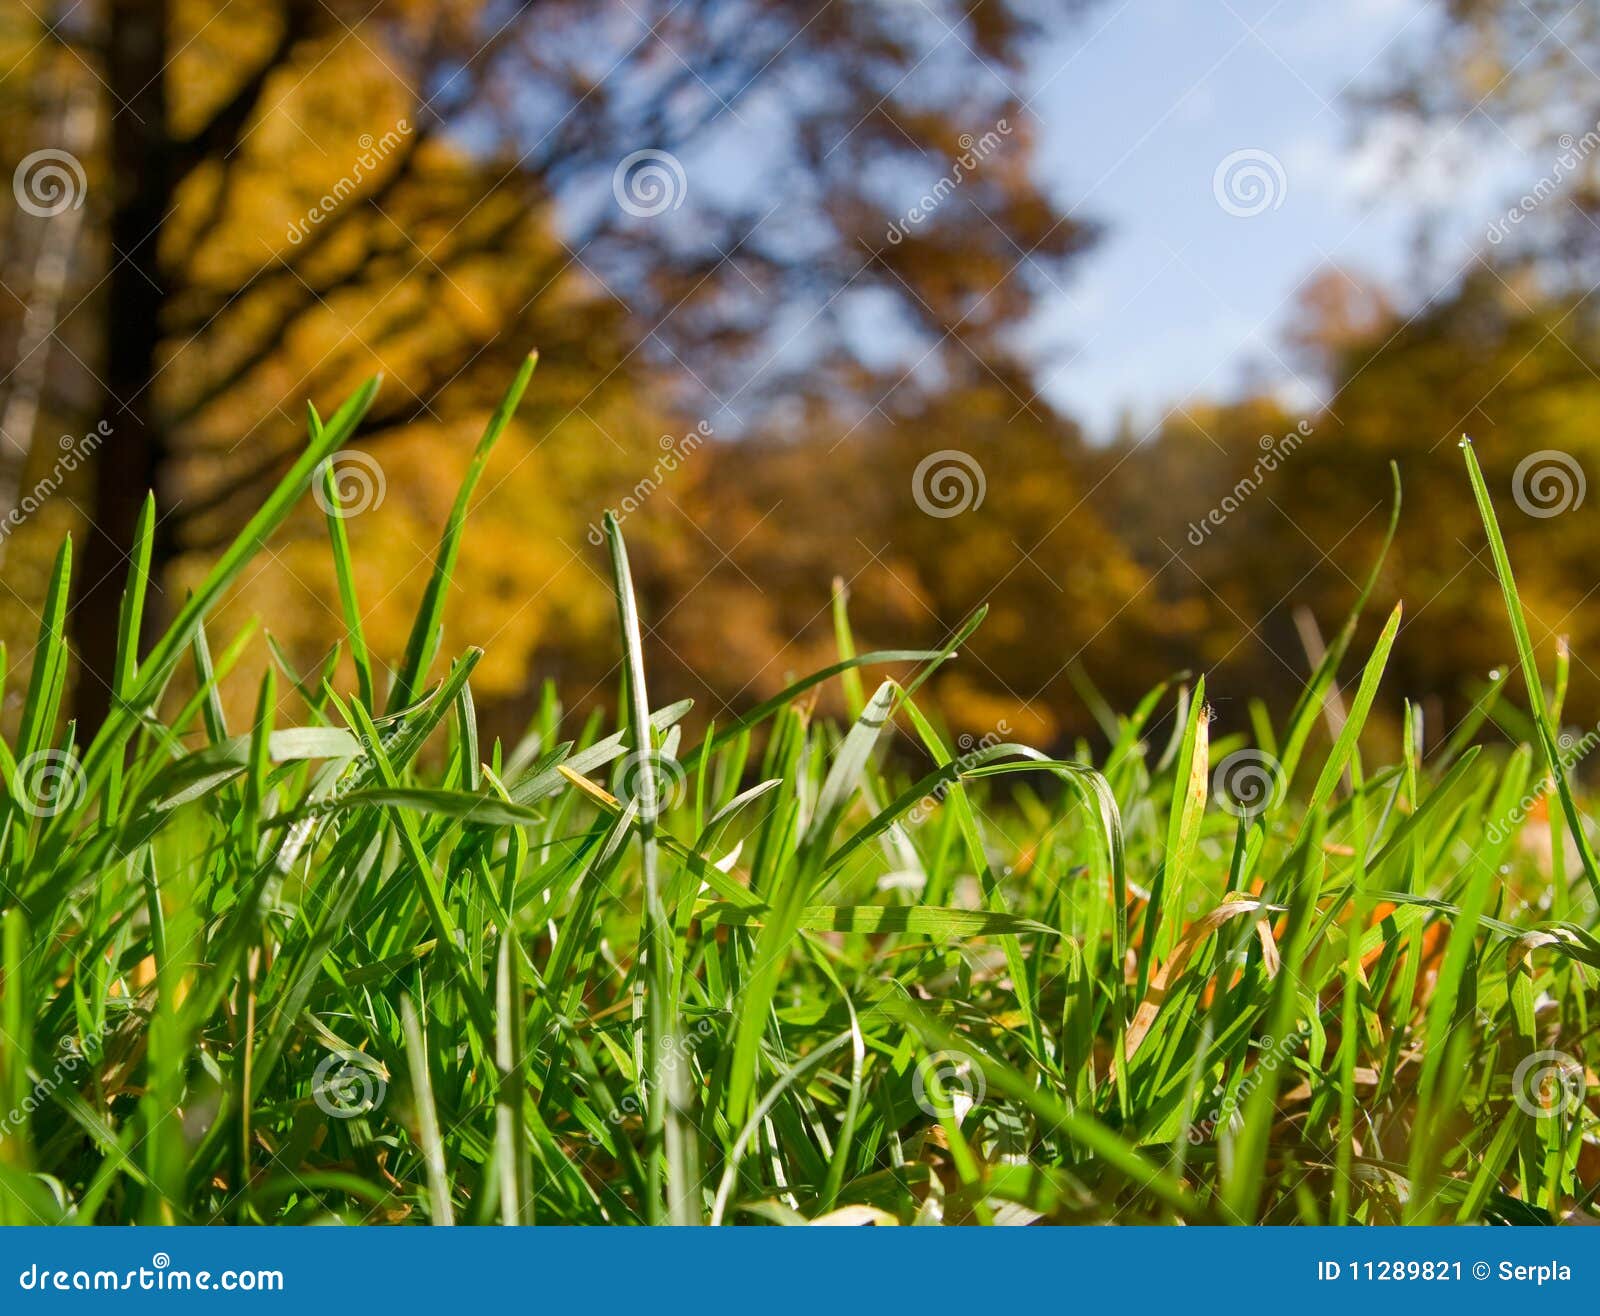 Green Grass Over Autumnal Forest Background Stock Image - Image of